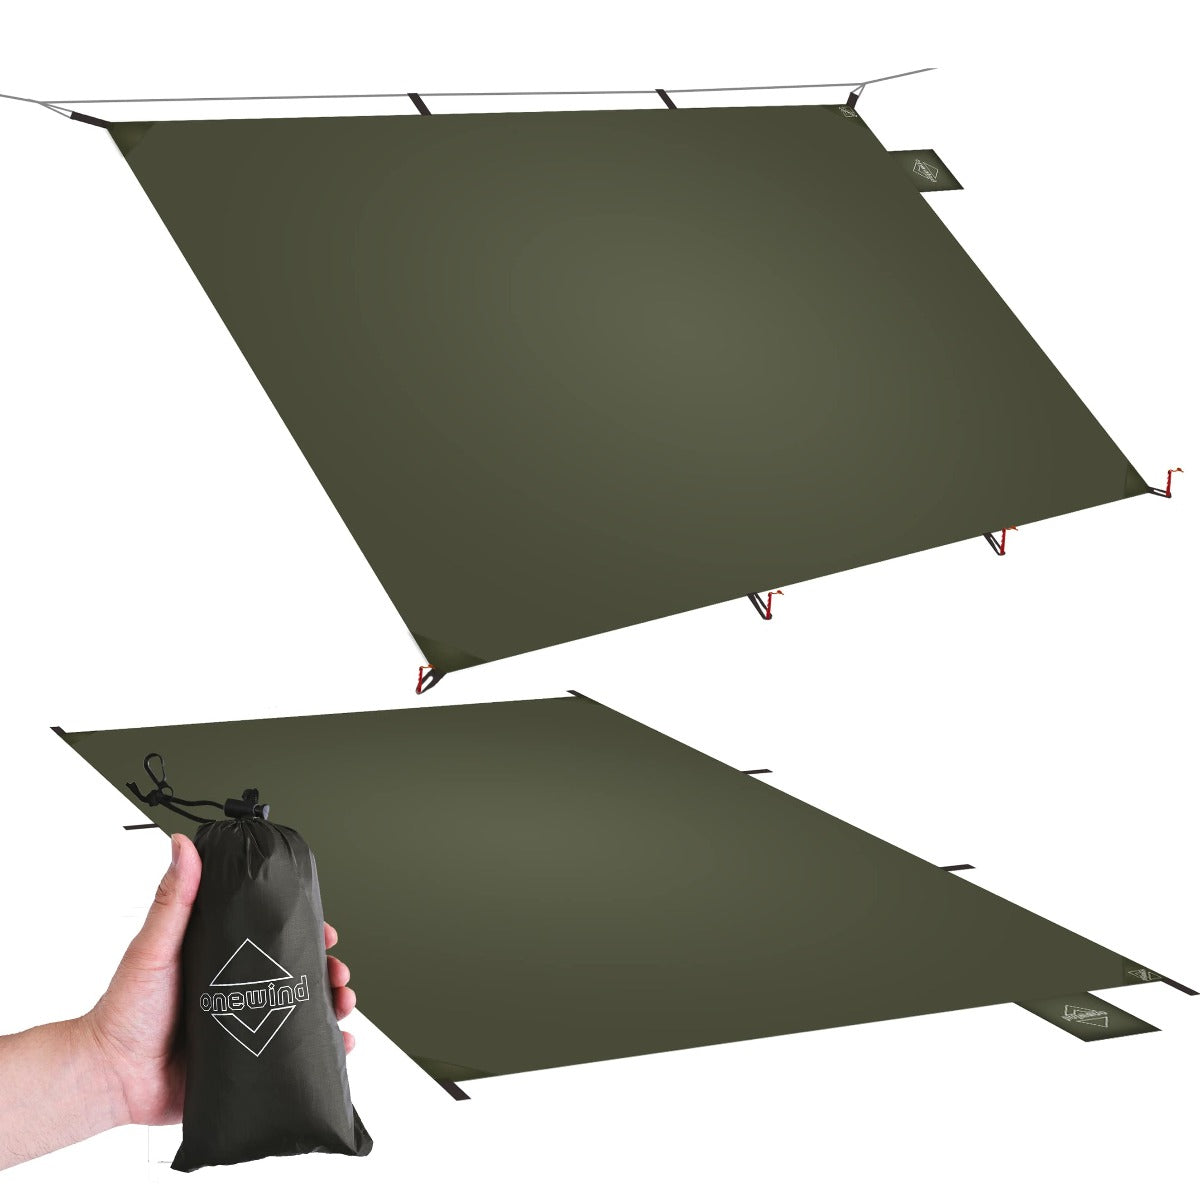 Tarps for Sale | Onewind Outdoors